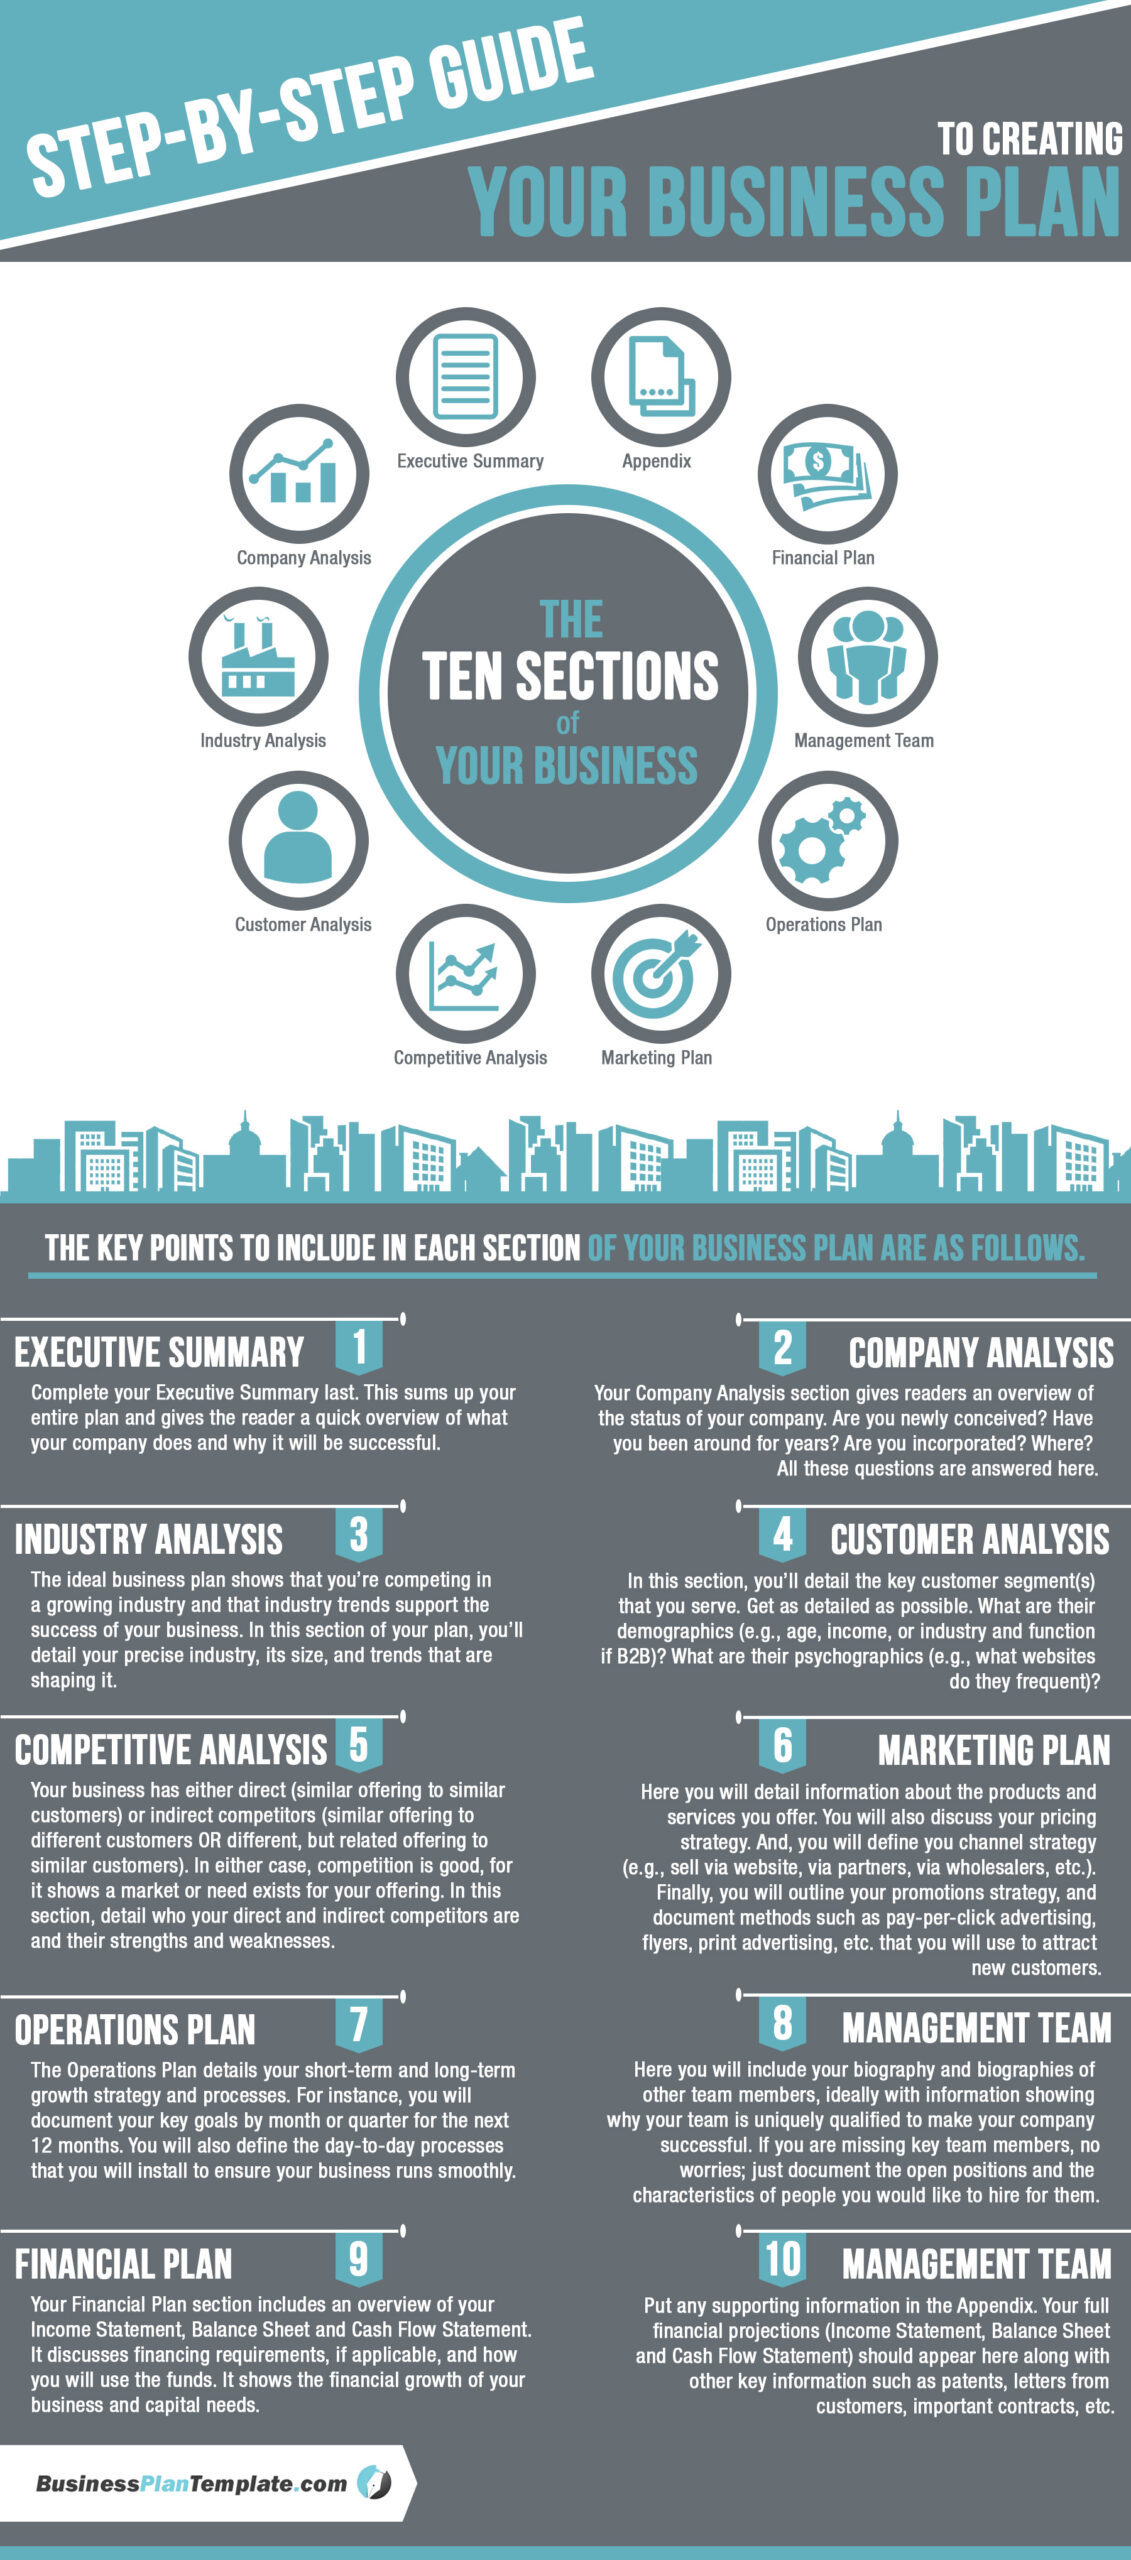 How to Create the Perfect Business Plan Infographic - Venngage